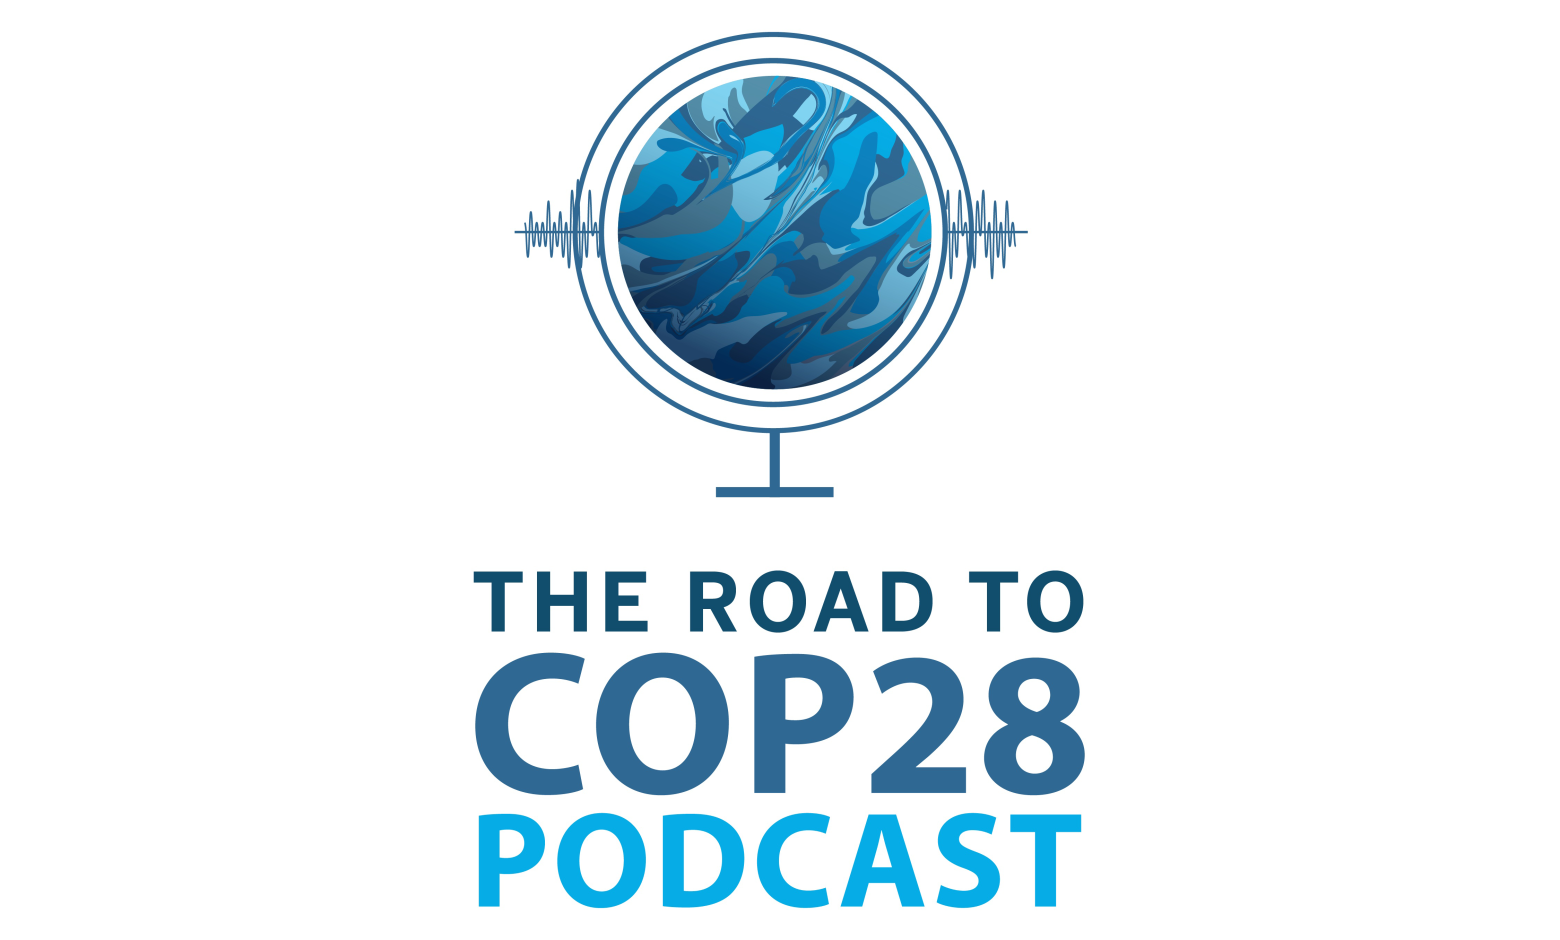 Graphic of an earth inside a podcast mic and the text "The road to COP 28 podcast" below